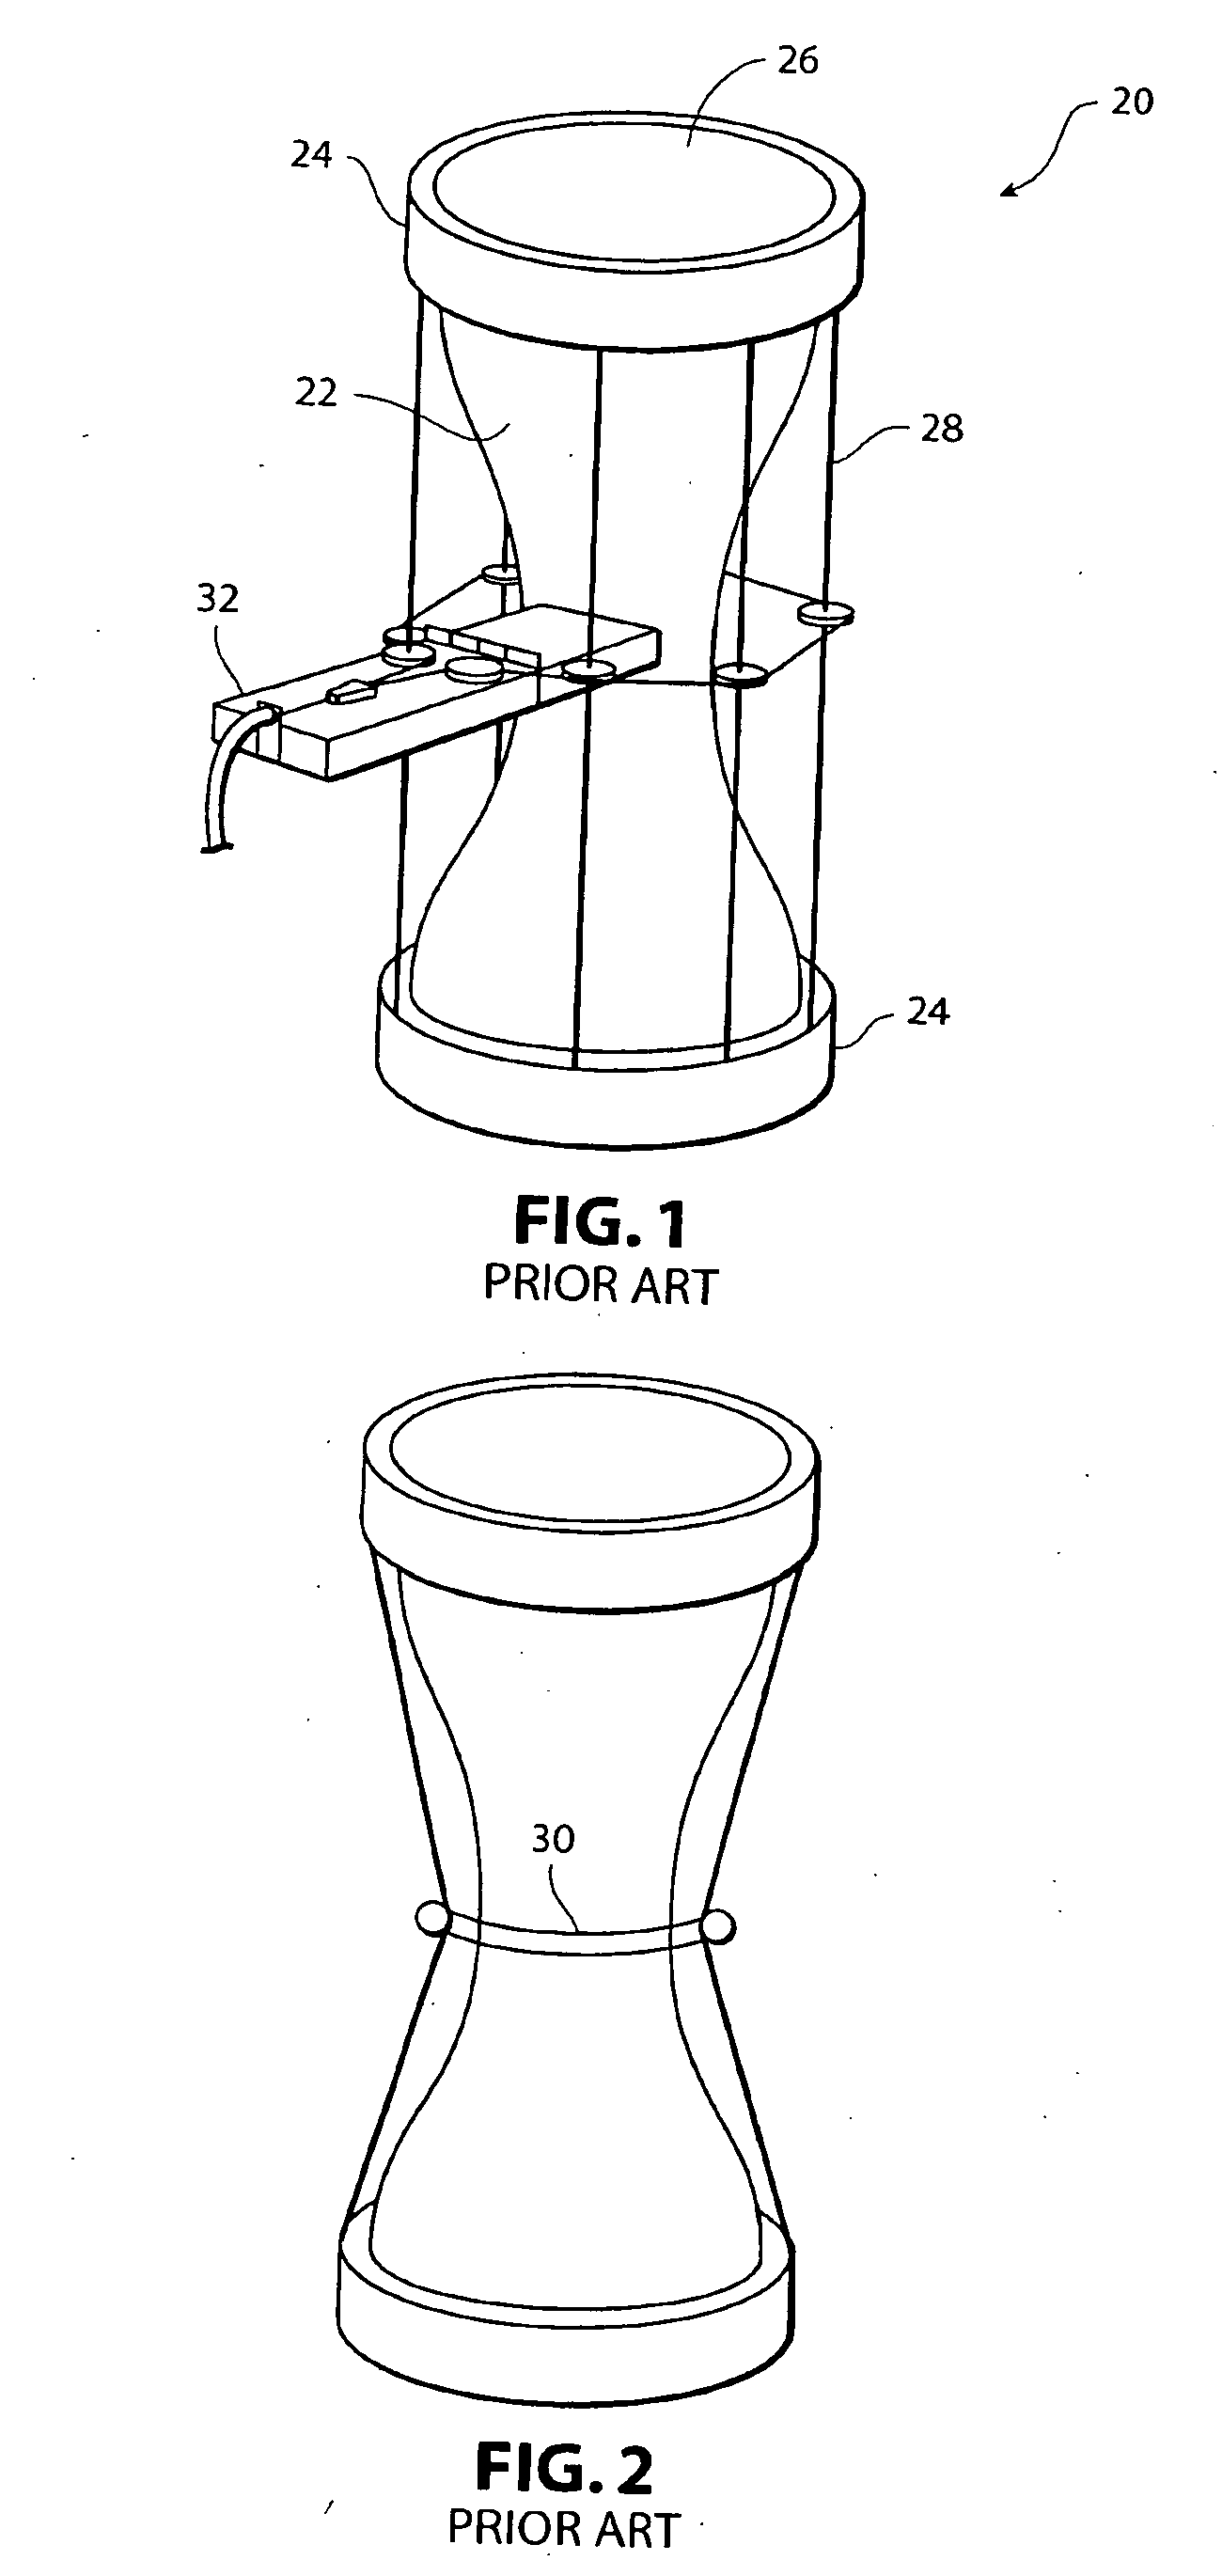 Single adjustment balancing and tuning of acoustic drums